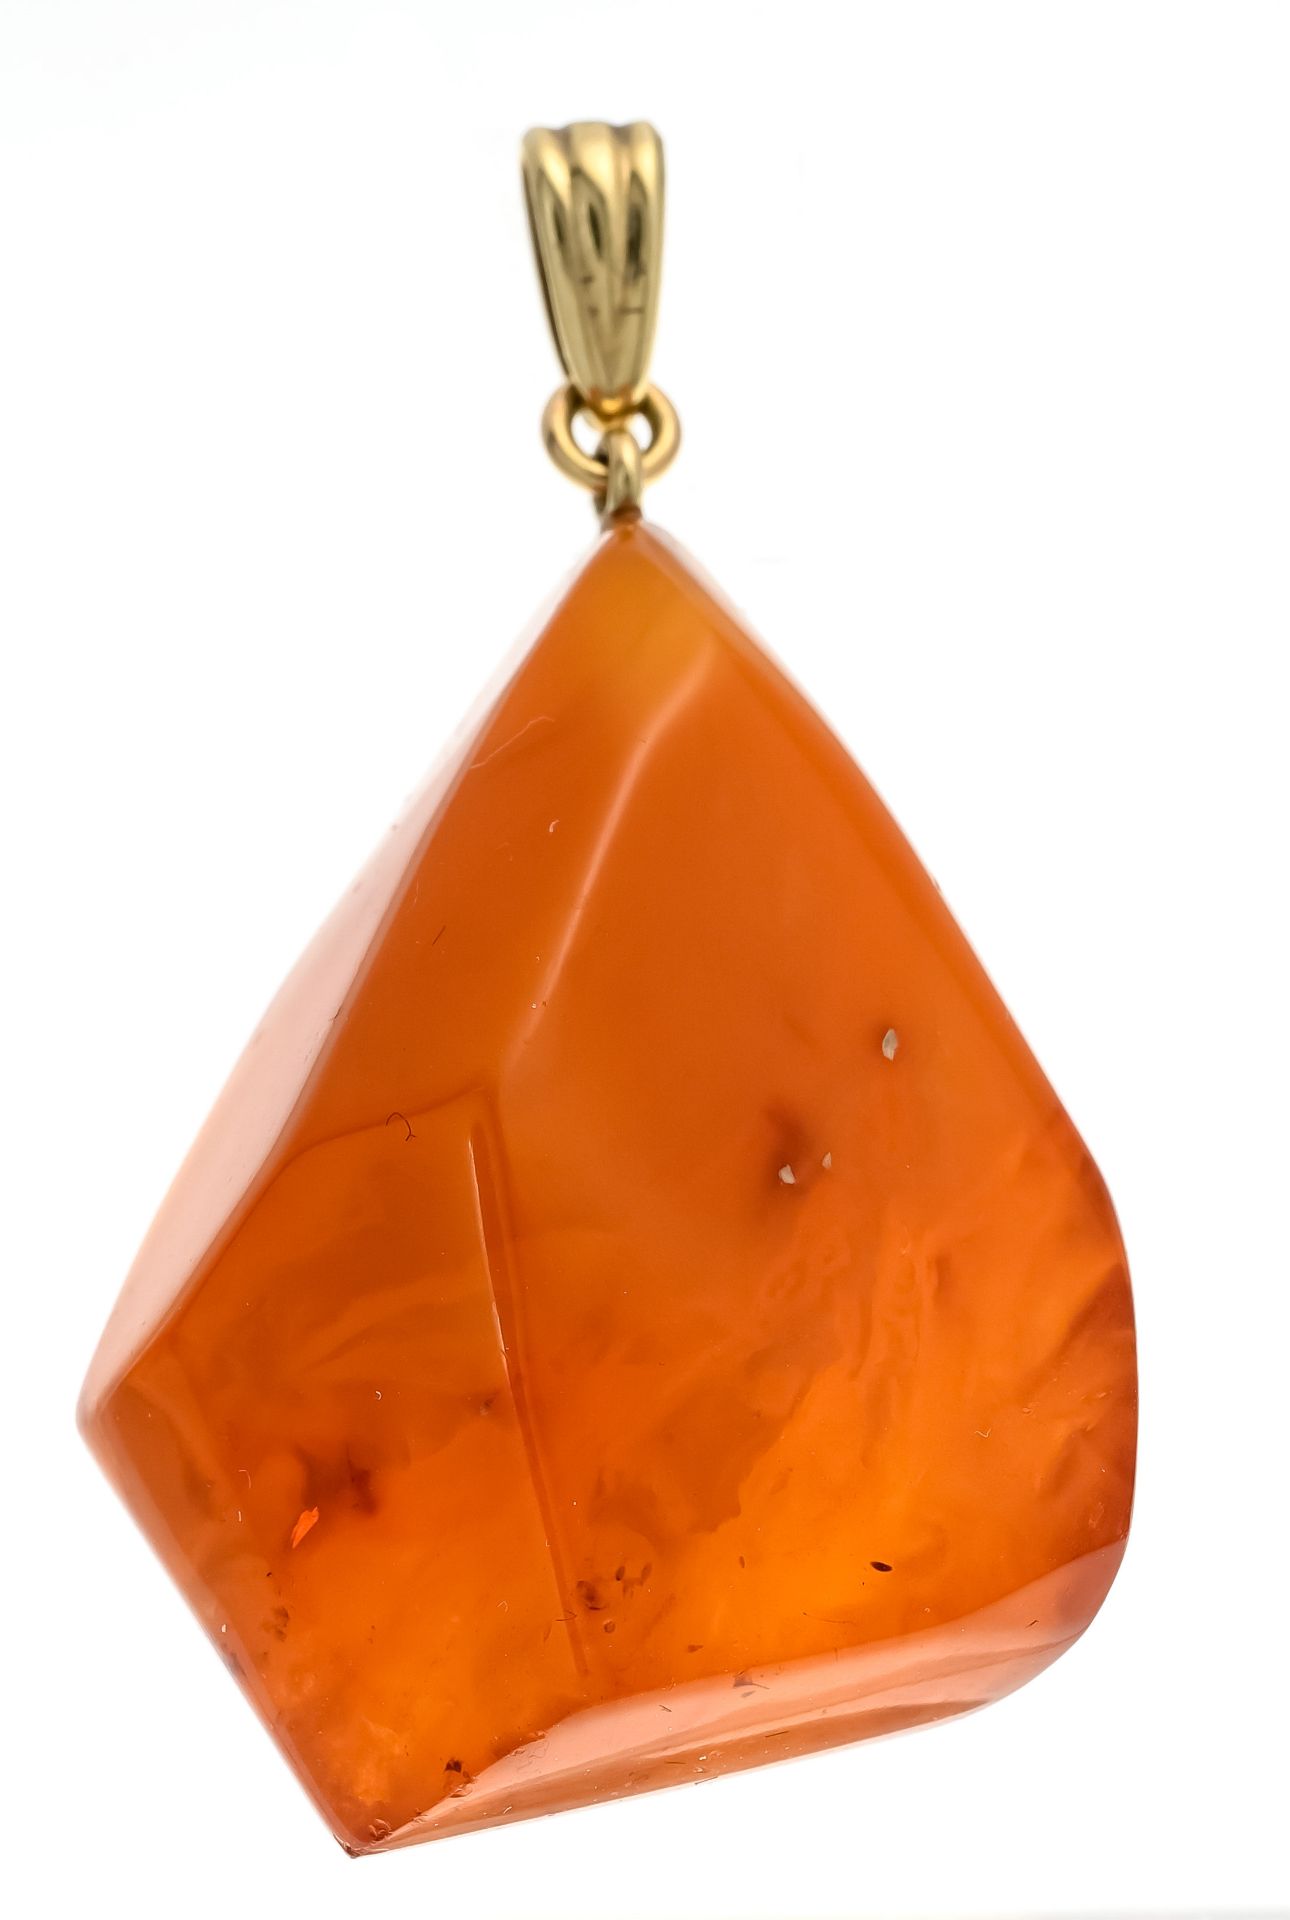 Amber pendant GG 585/000 with a drop-shaped fantasy cut faceted amber 39 x 30 mm, butterscotch